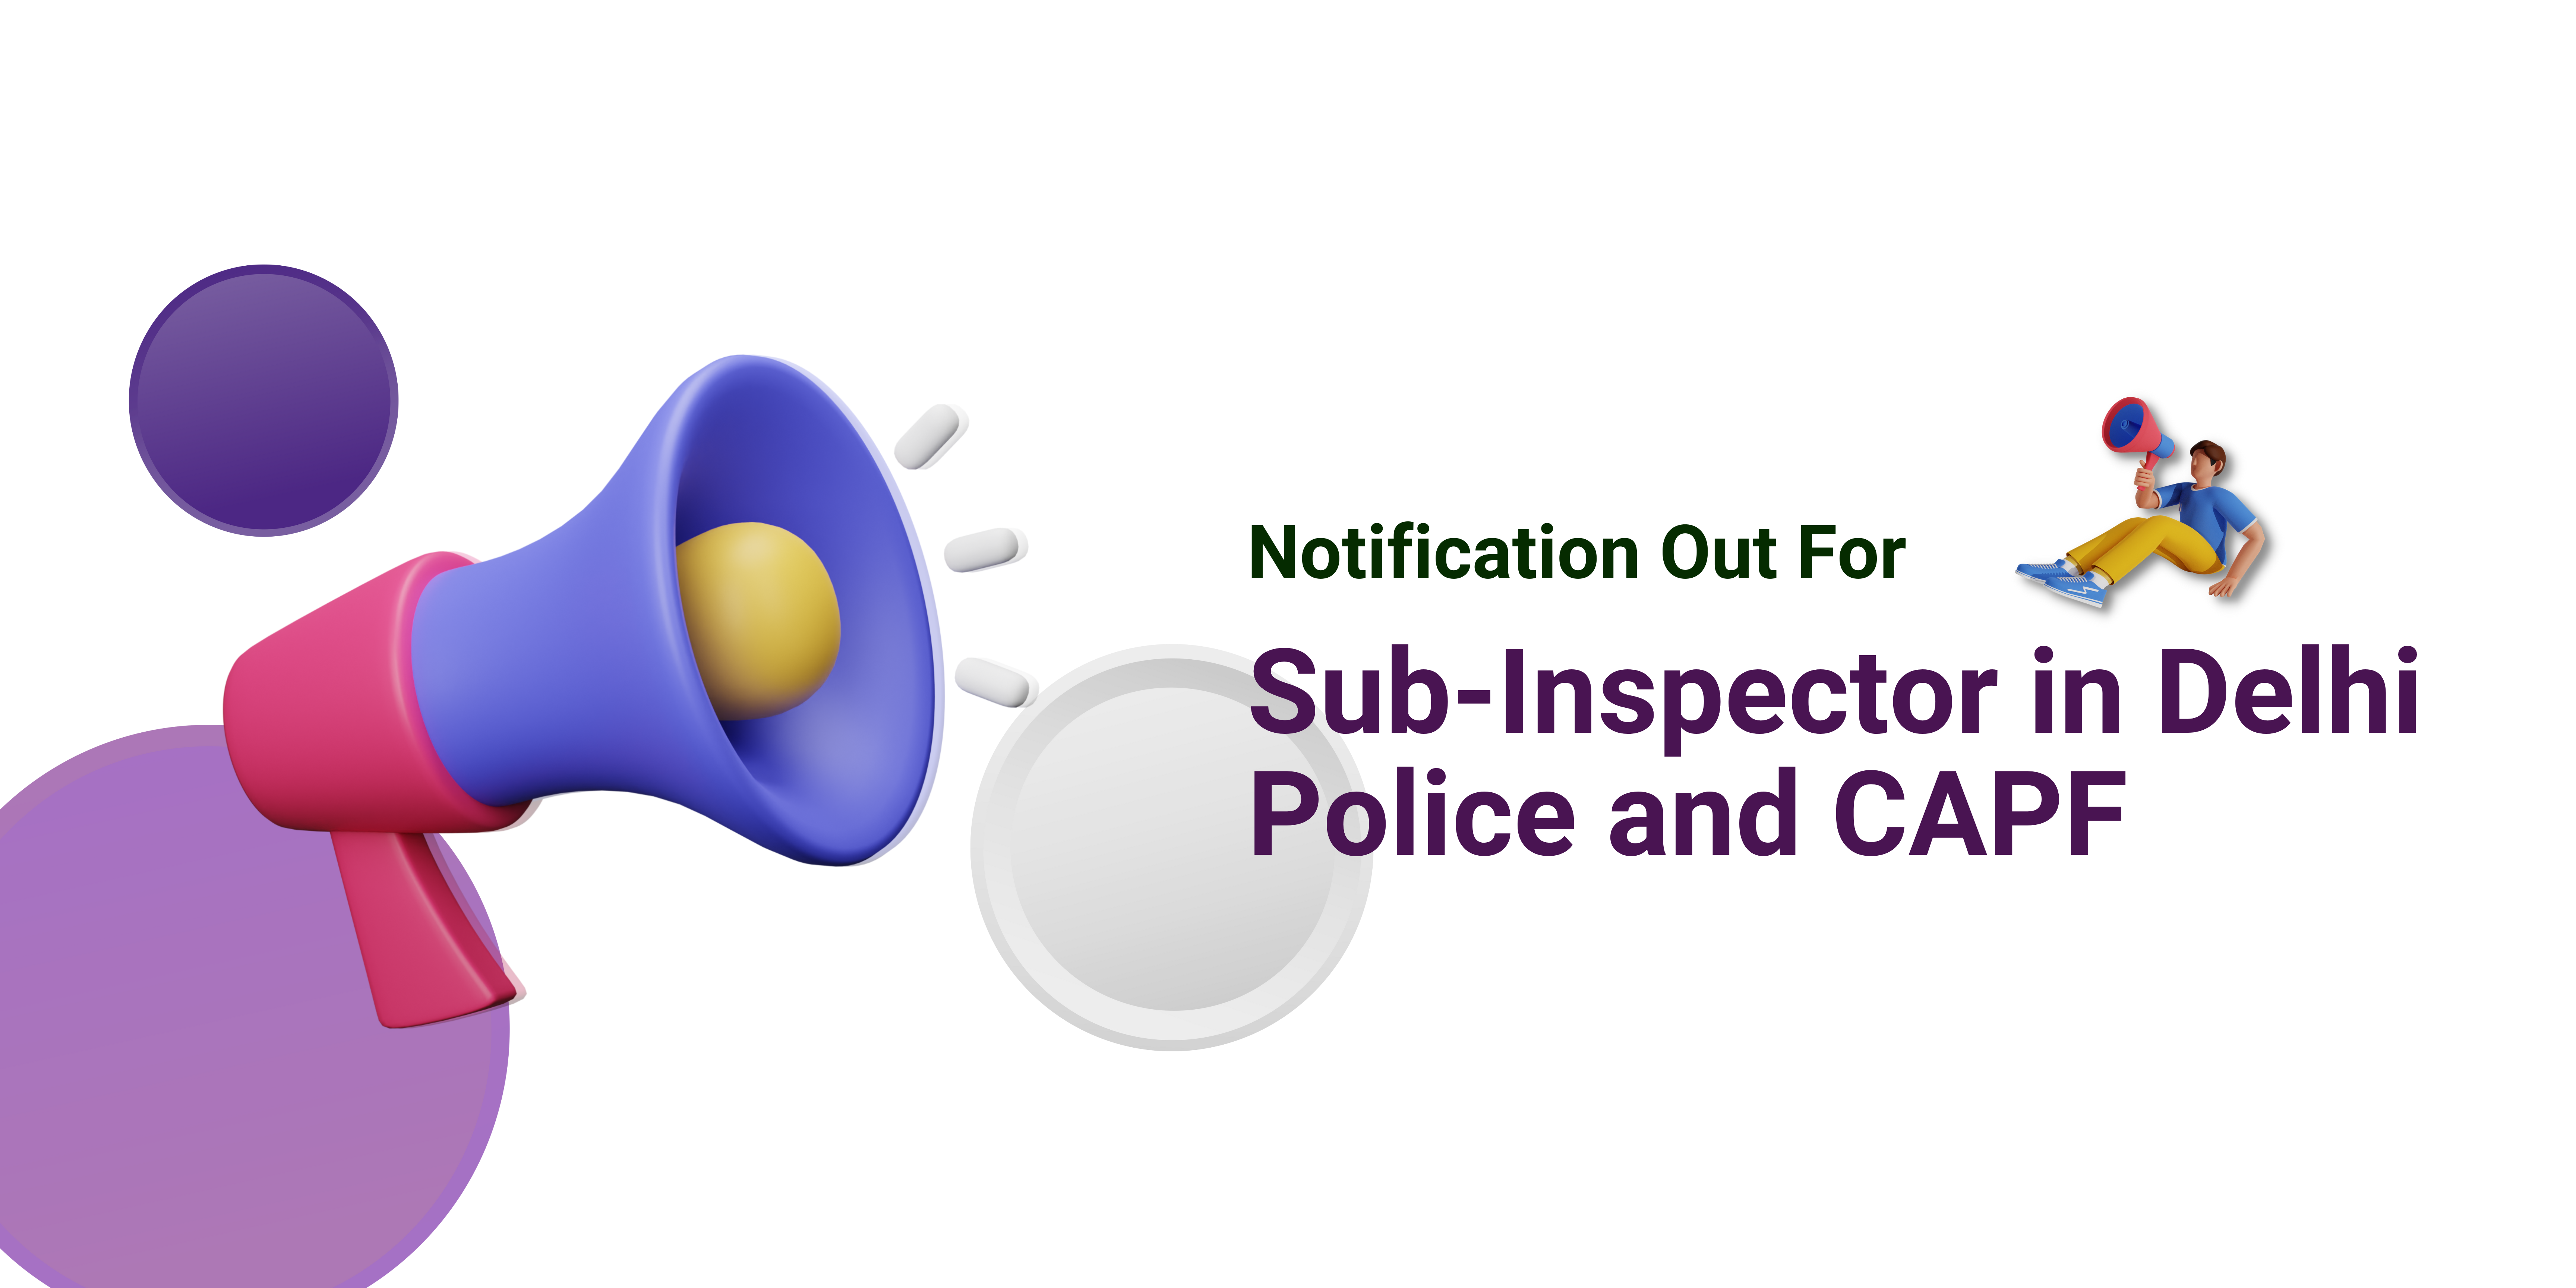 Sub-Inspector in Delhi Police and CAPF 2022 Notification Out